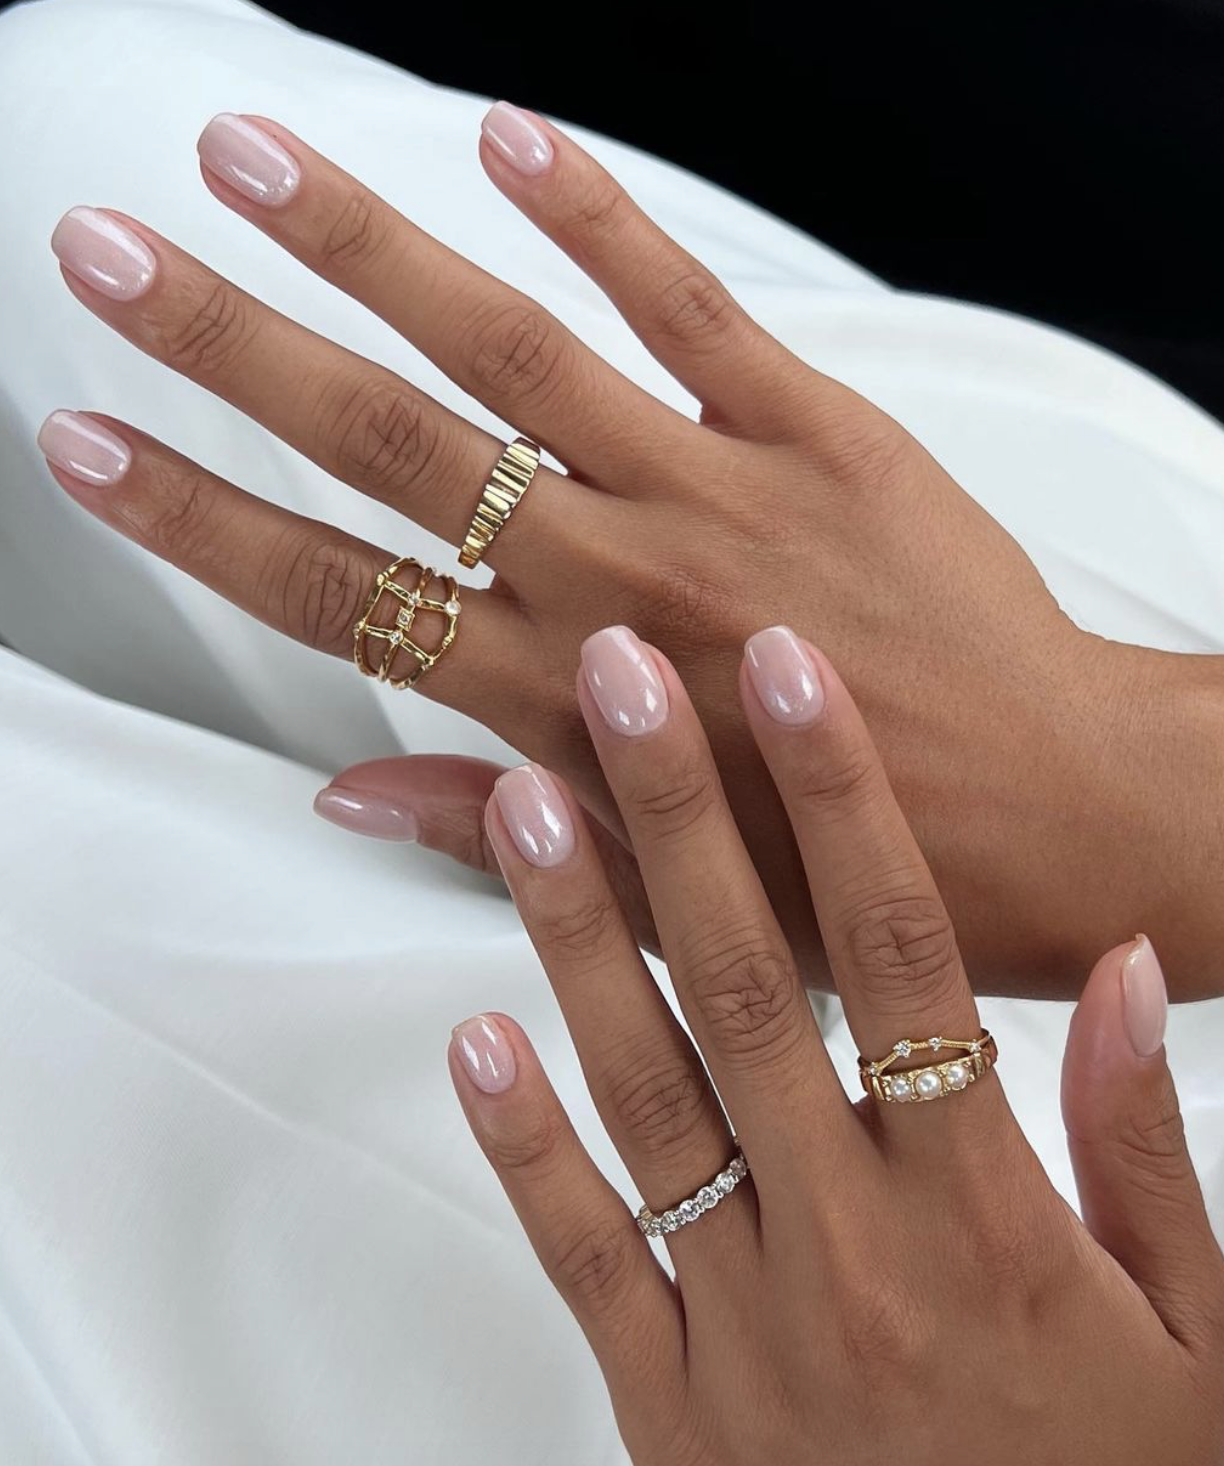 Chrome nails of light color are on trend